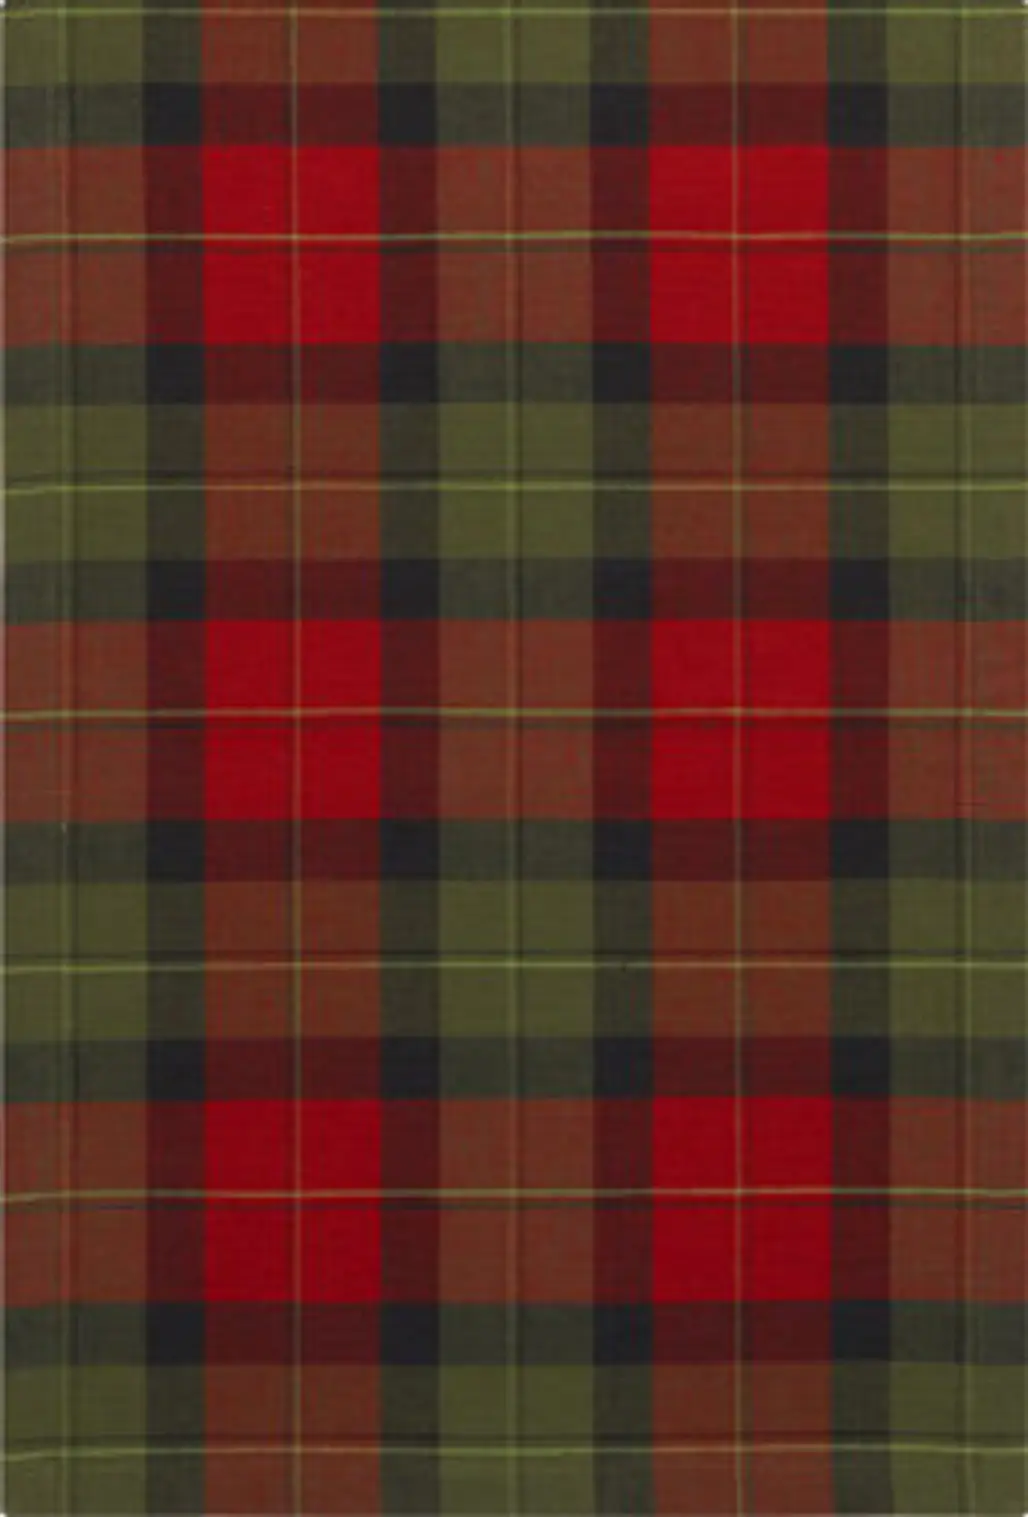 Crate & Barrel Holiday Plaid Runner